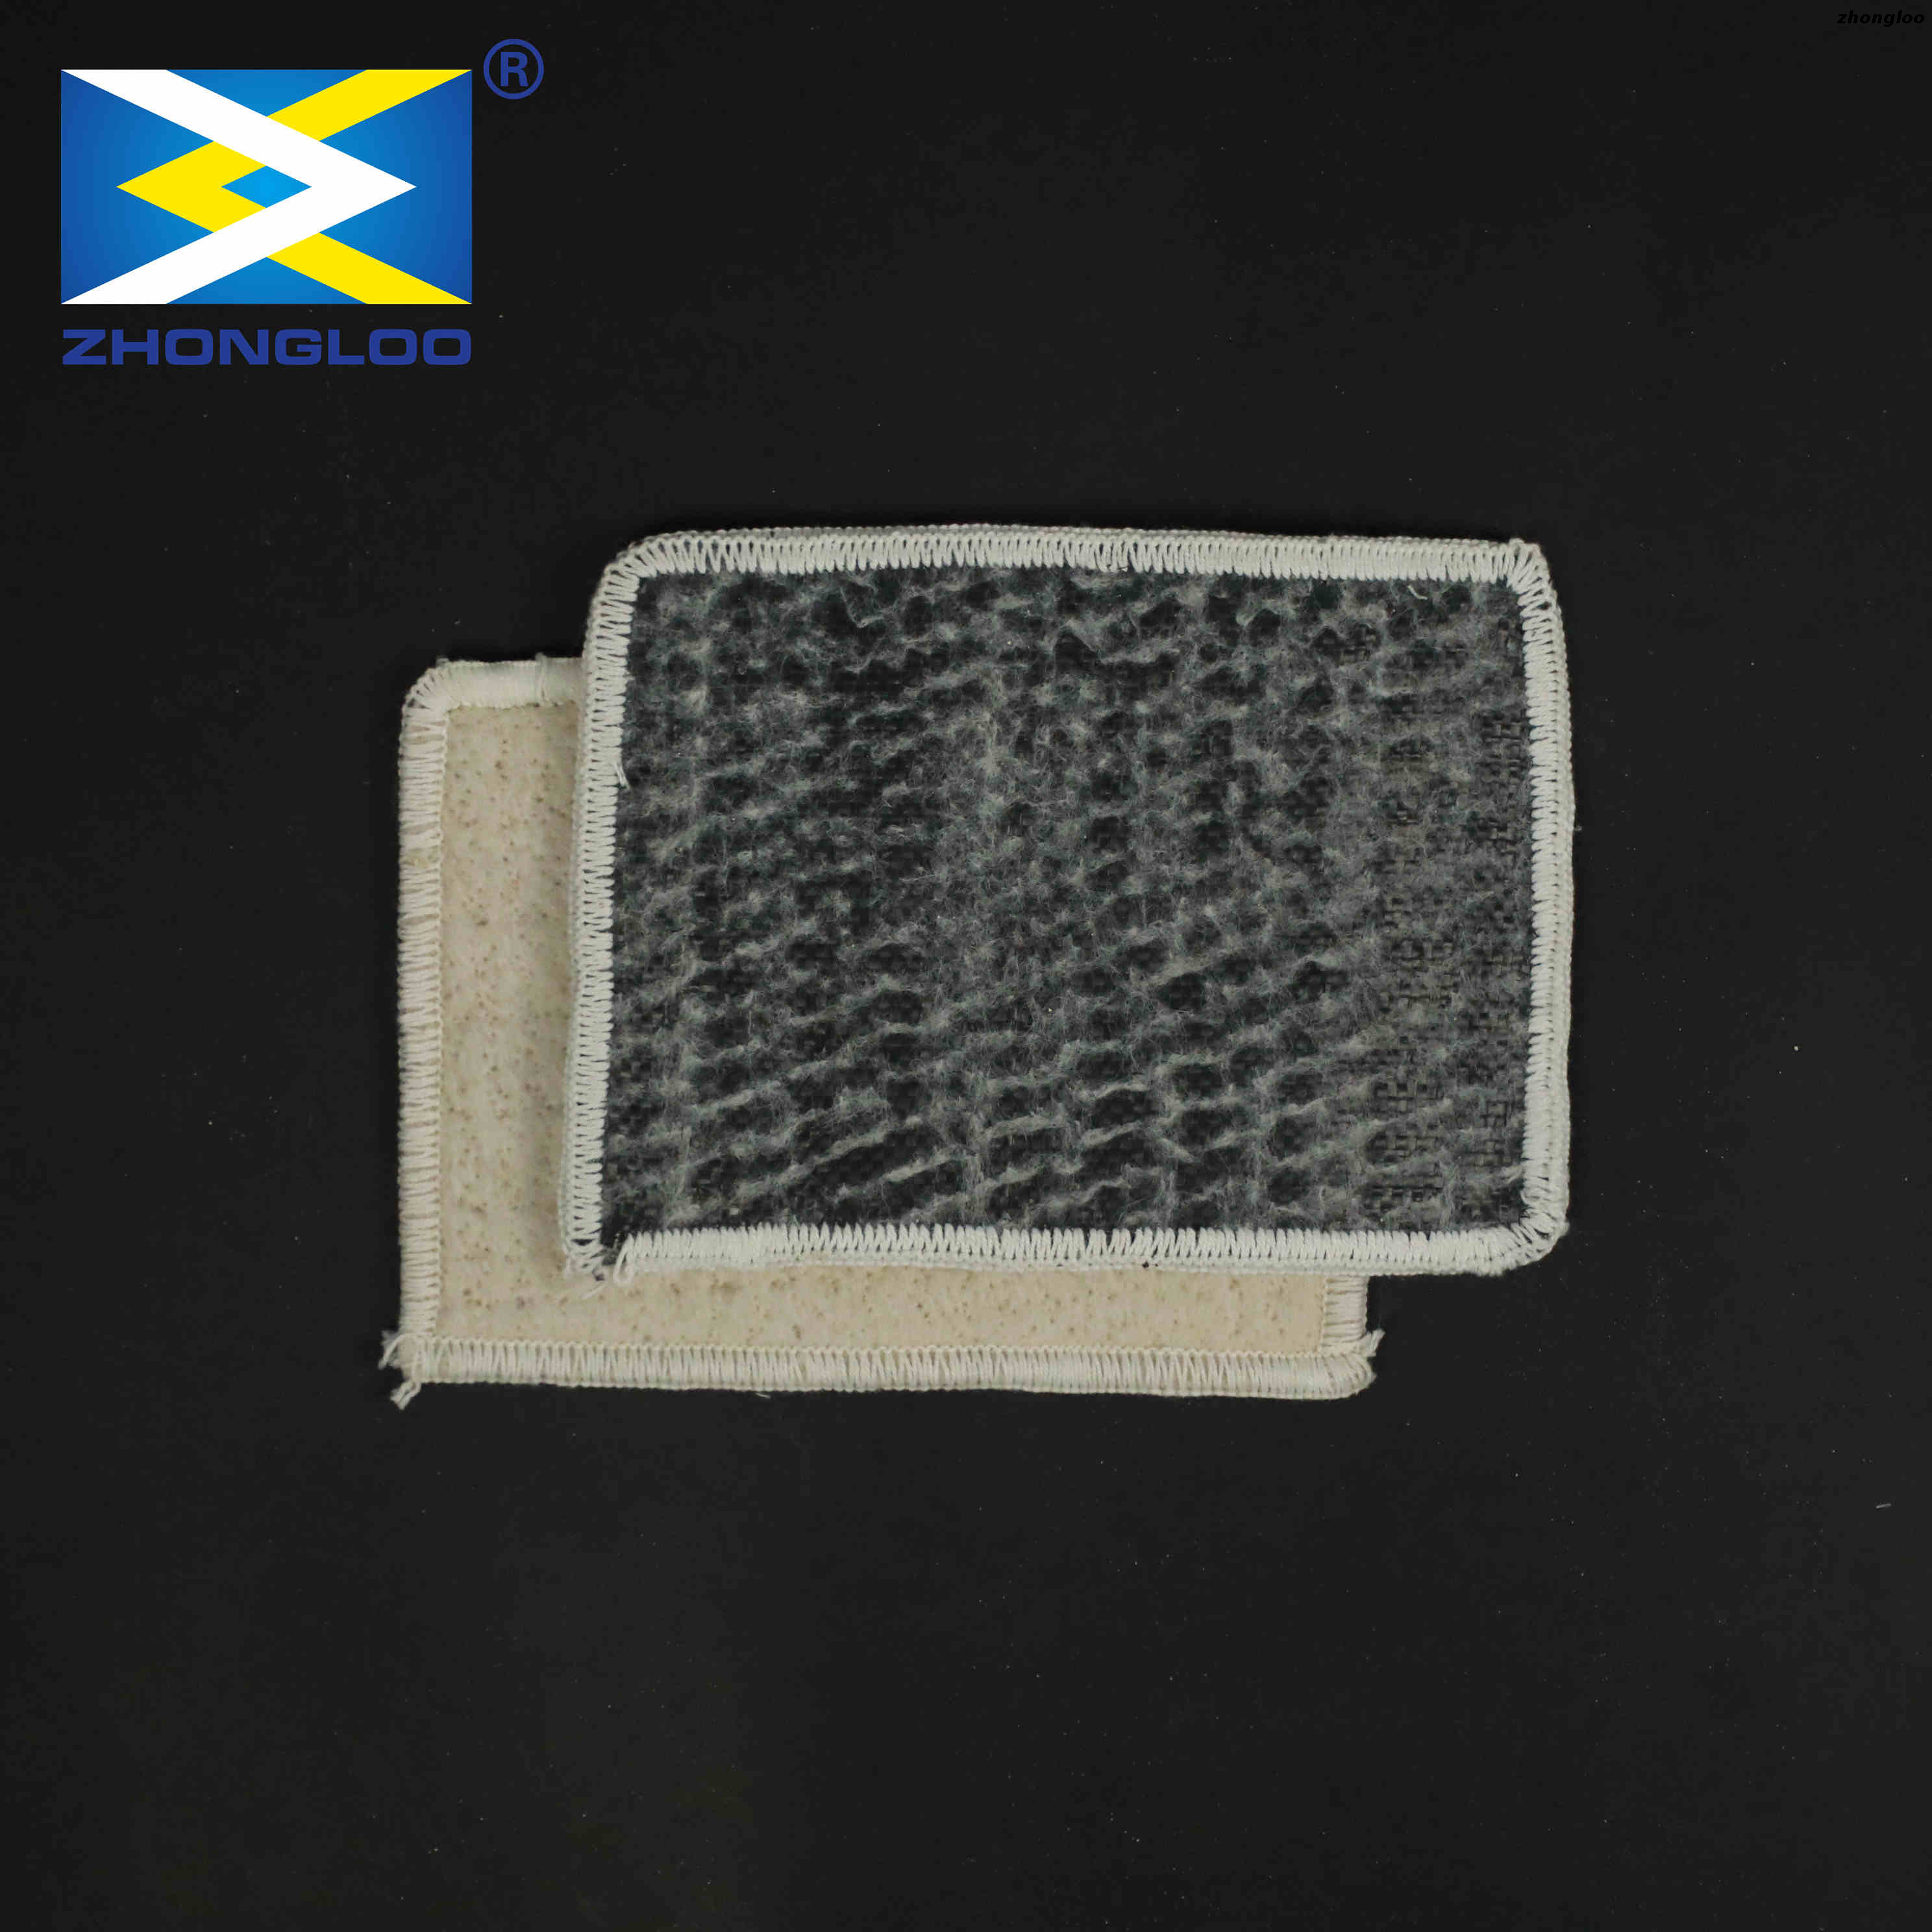 Bentonite Waterproof Blanket Geosynthetic Clay Liner For Artificial Lakes Sodium Base Bentonite Composite Waterproof Blanket